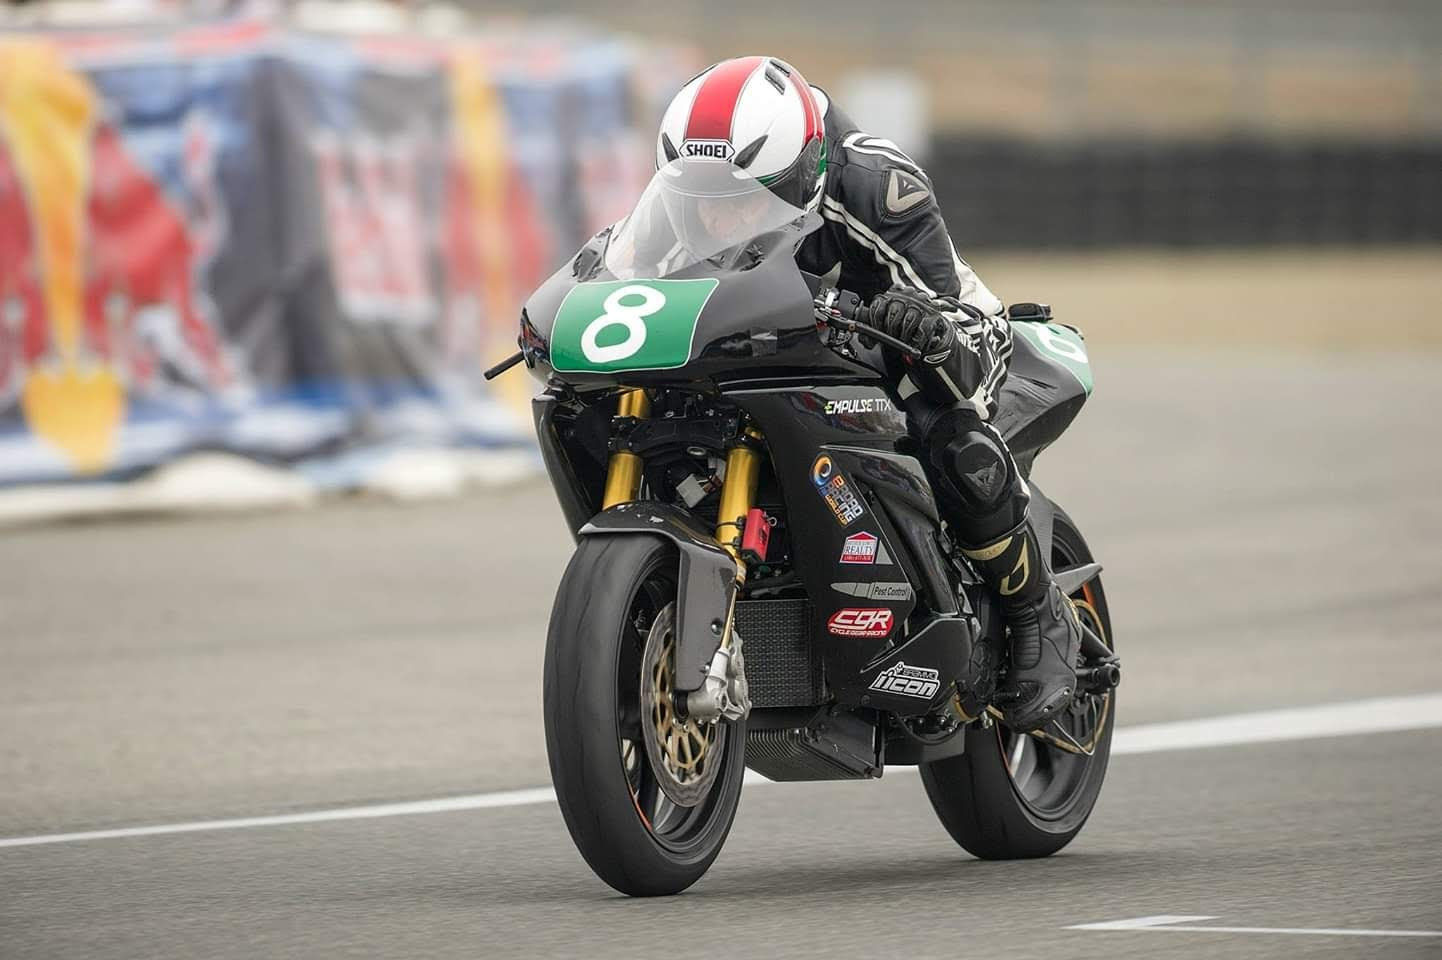 Arthur Kowitz (8) in action on an electric road race motorcycle. Photo courtesy of Arthur Kowitz.